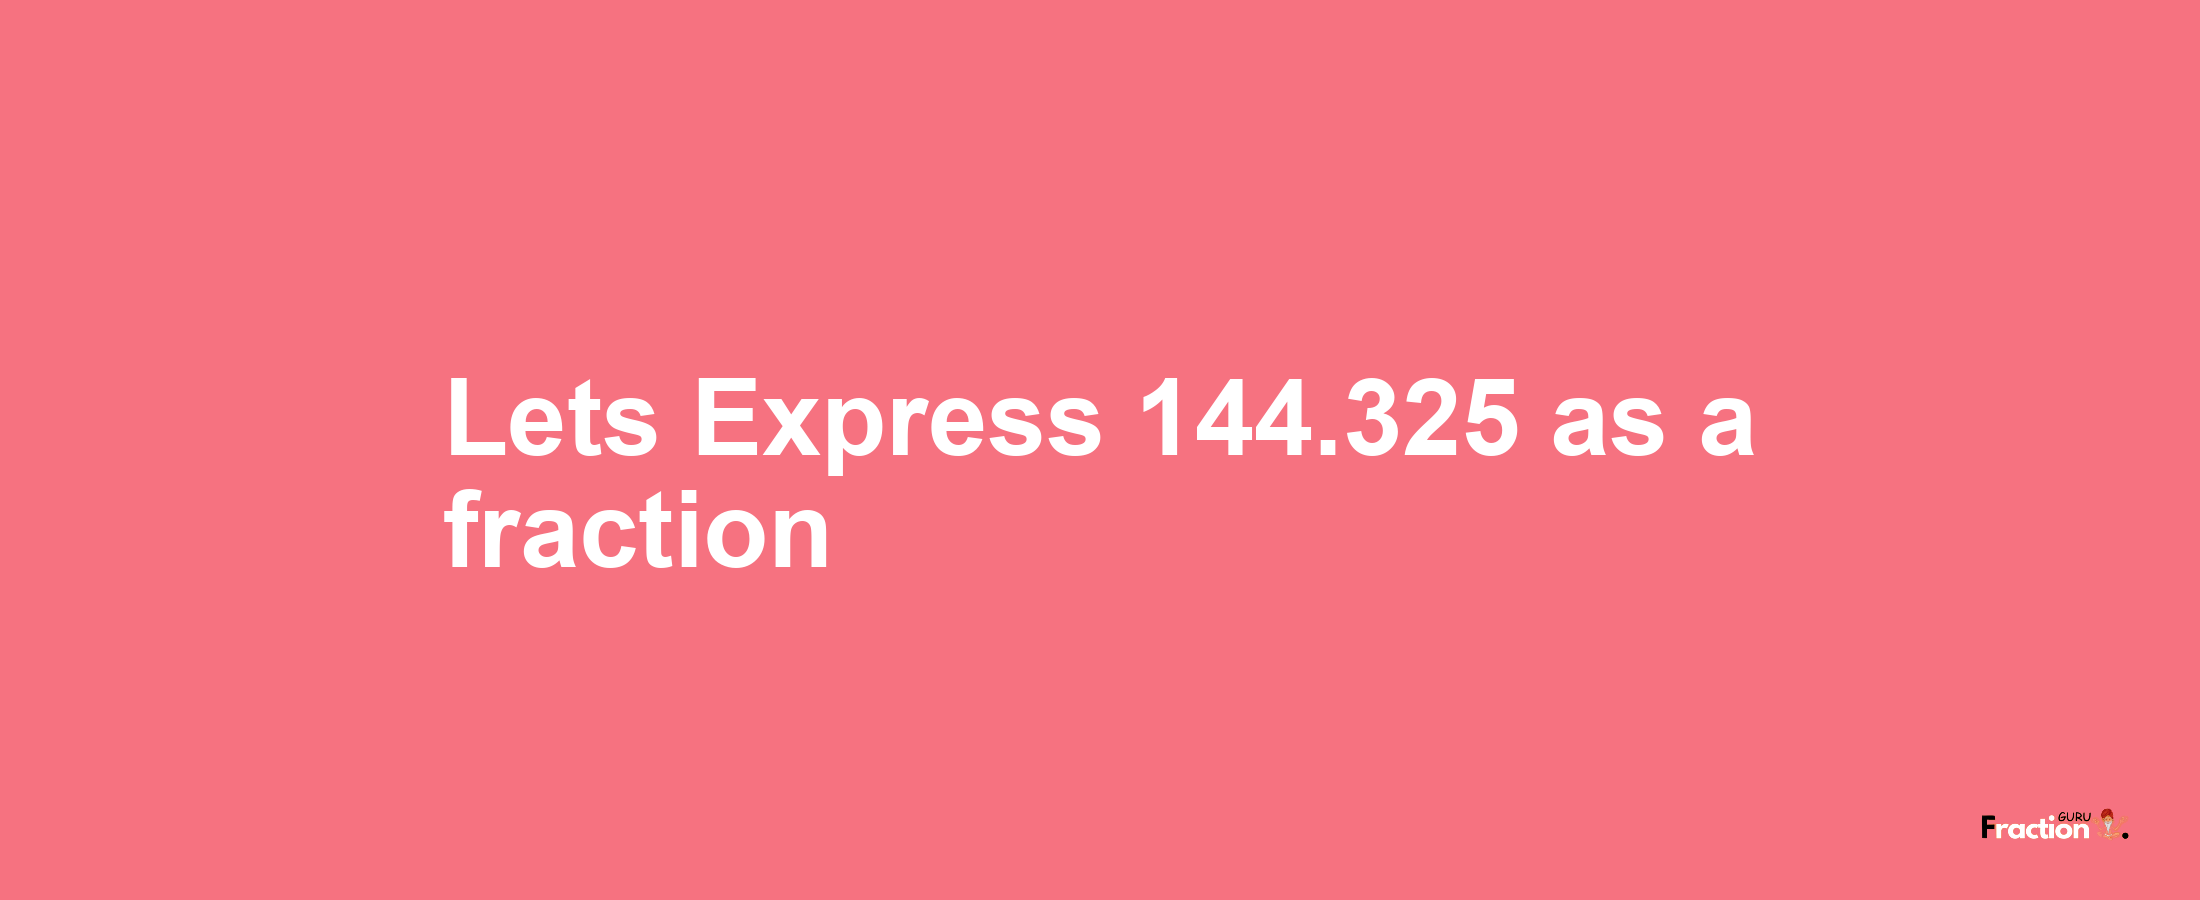 Lets Express 144.325 as afraction